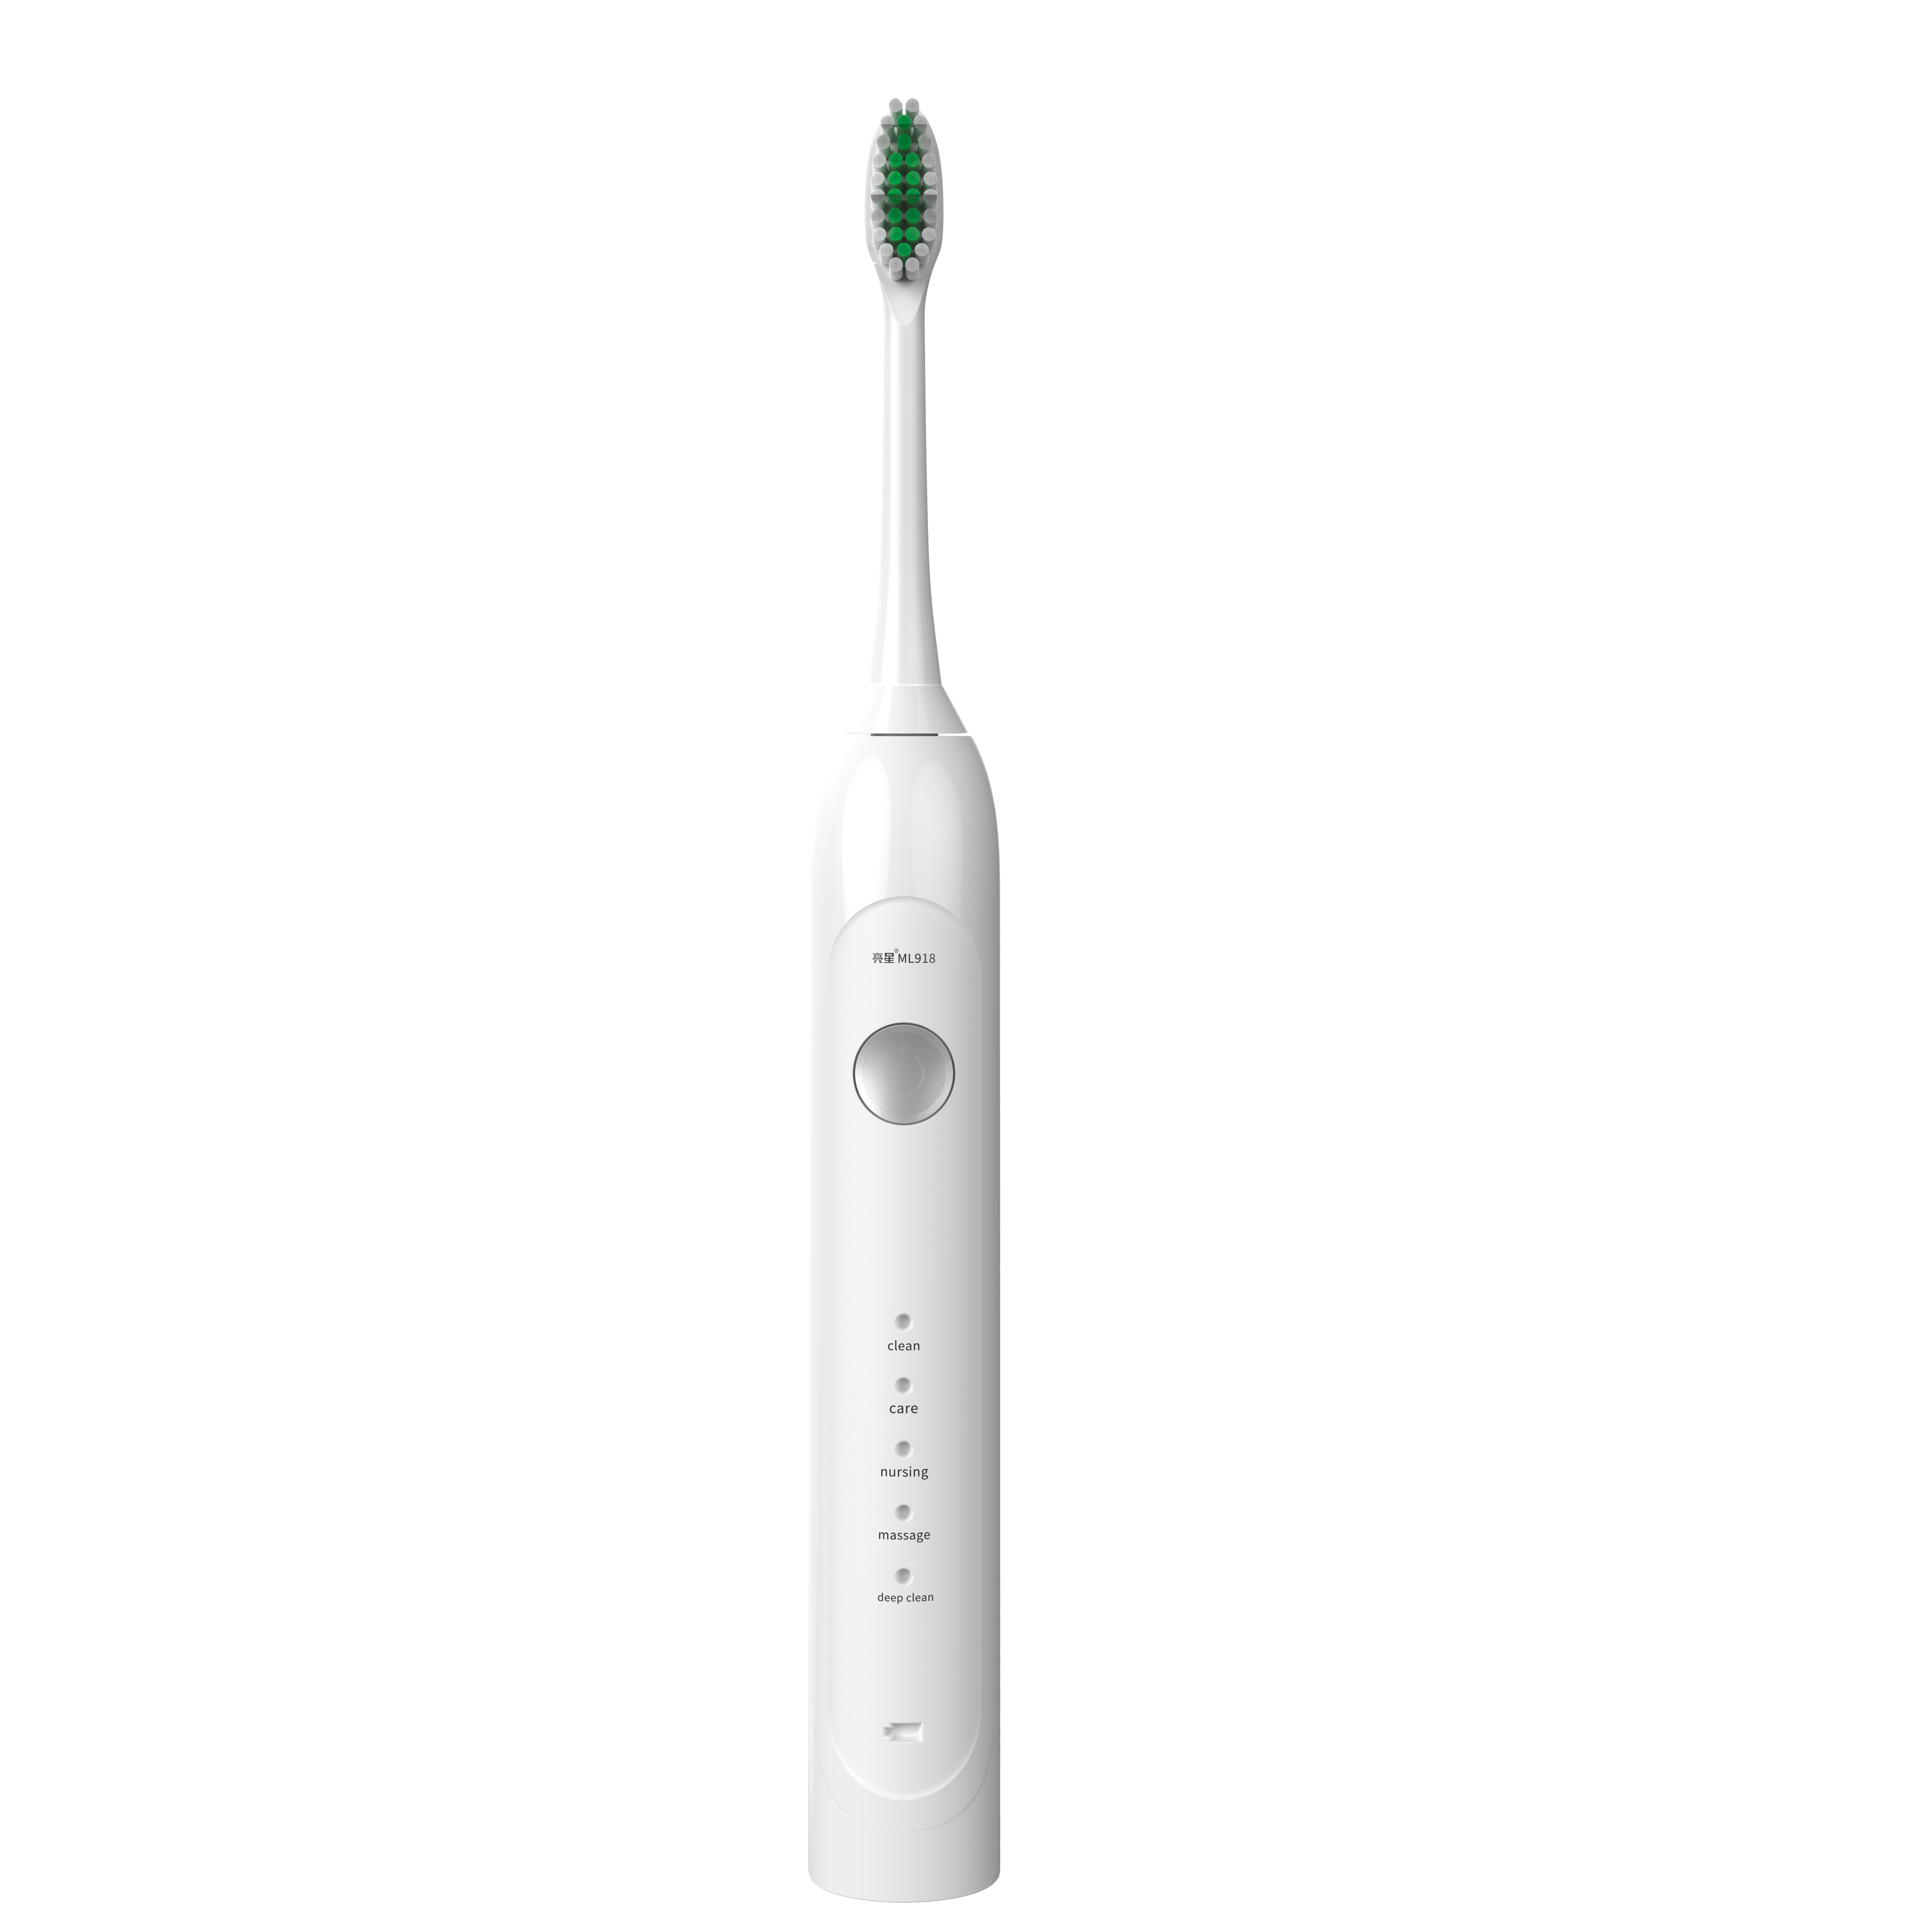 Optional modes travel and home use sonic toothbrush electric rechargeable power toothbrush